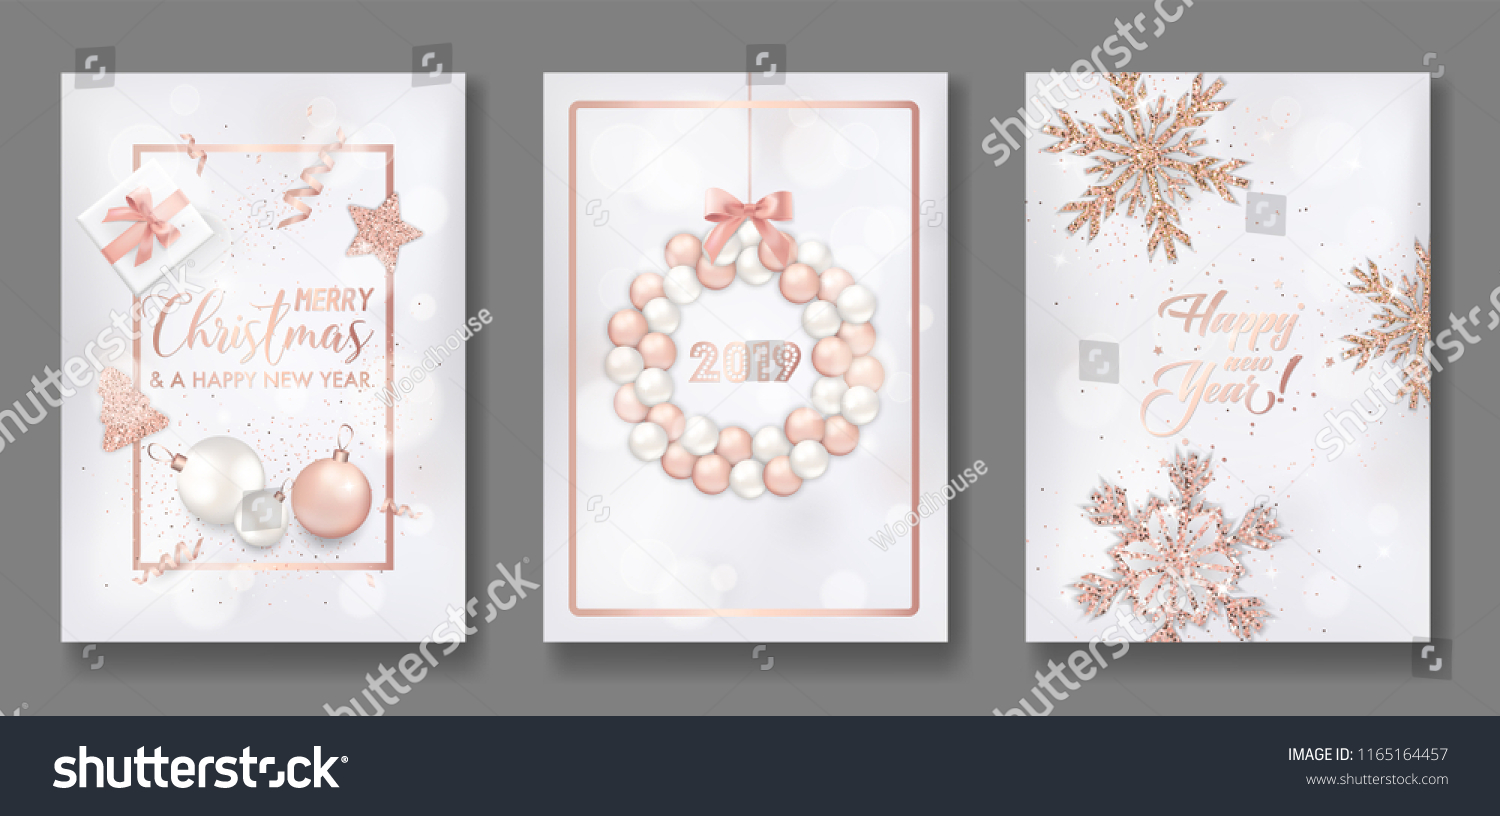 SVG of Set of Elegant Merry Christmas and New Year 2019 Cards with Shining Rose Gold Glitter Xmas Balls, Stars, Snowflakes for greetings, invitation, flyer, brochure, cover in vector svg